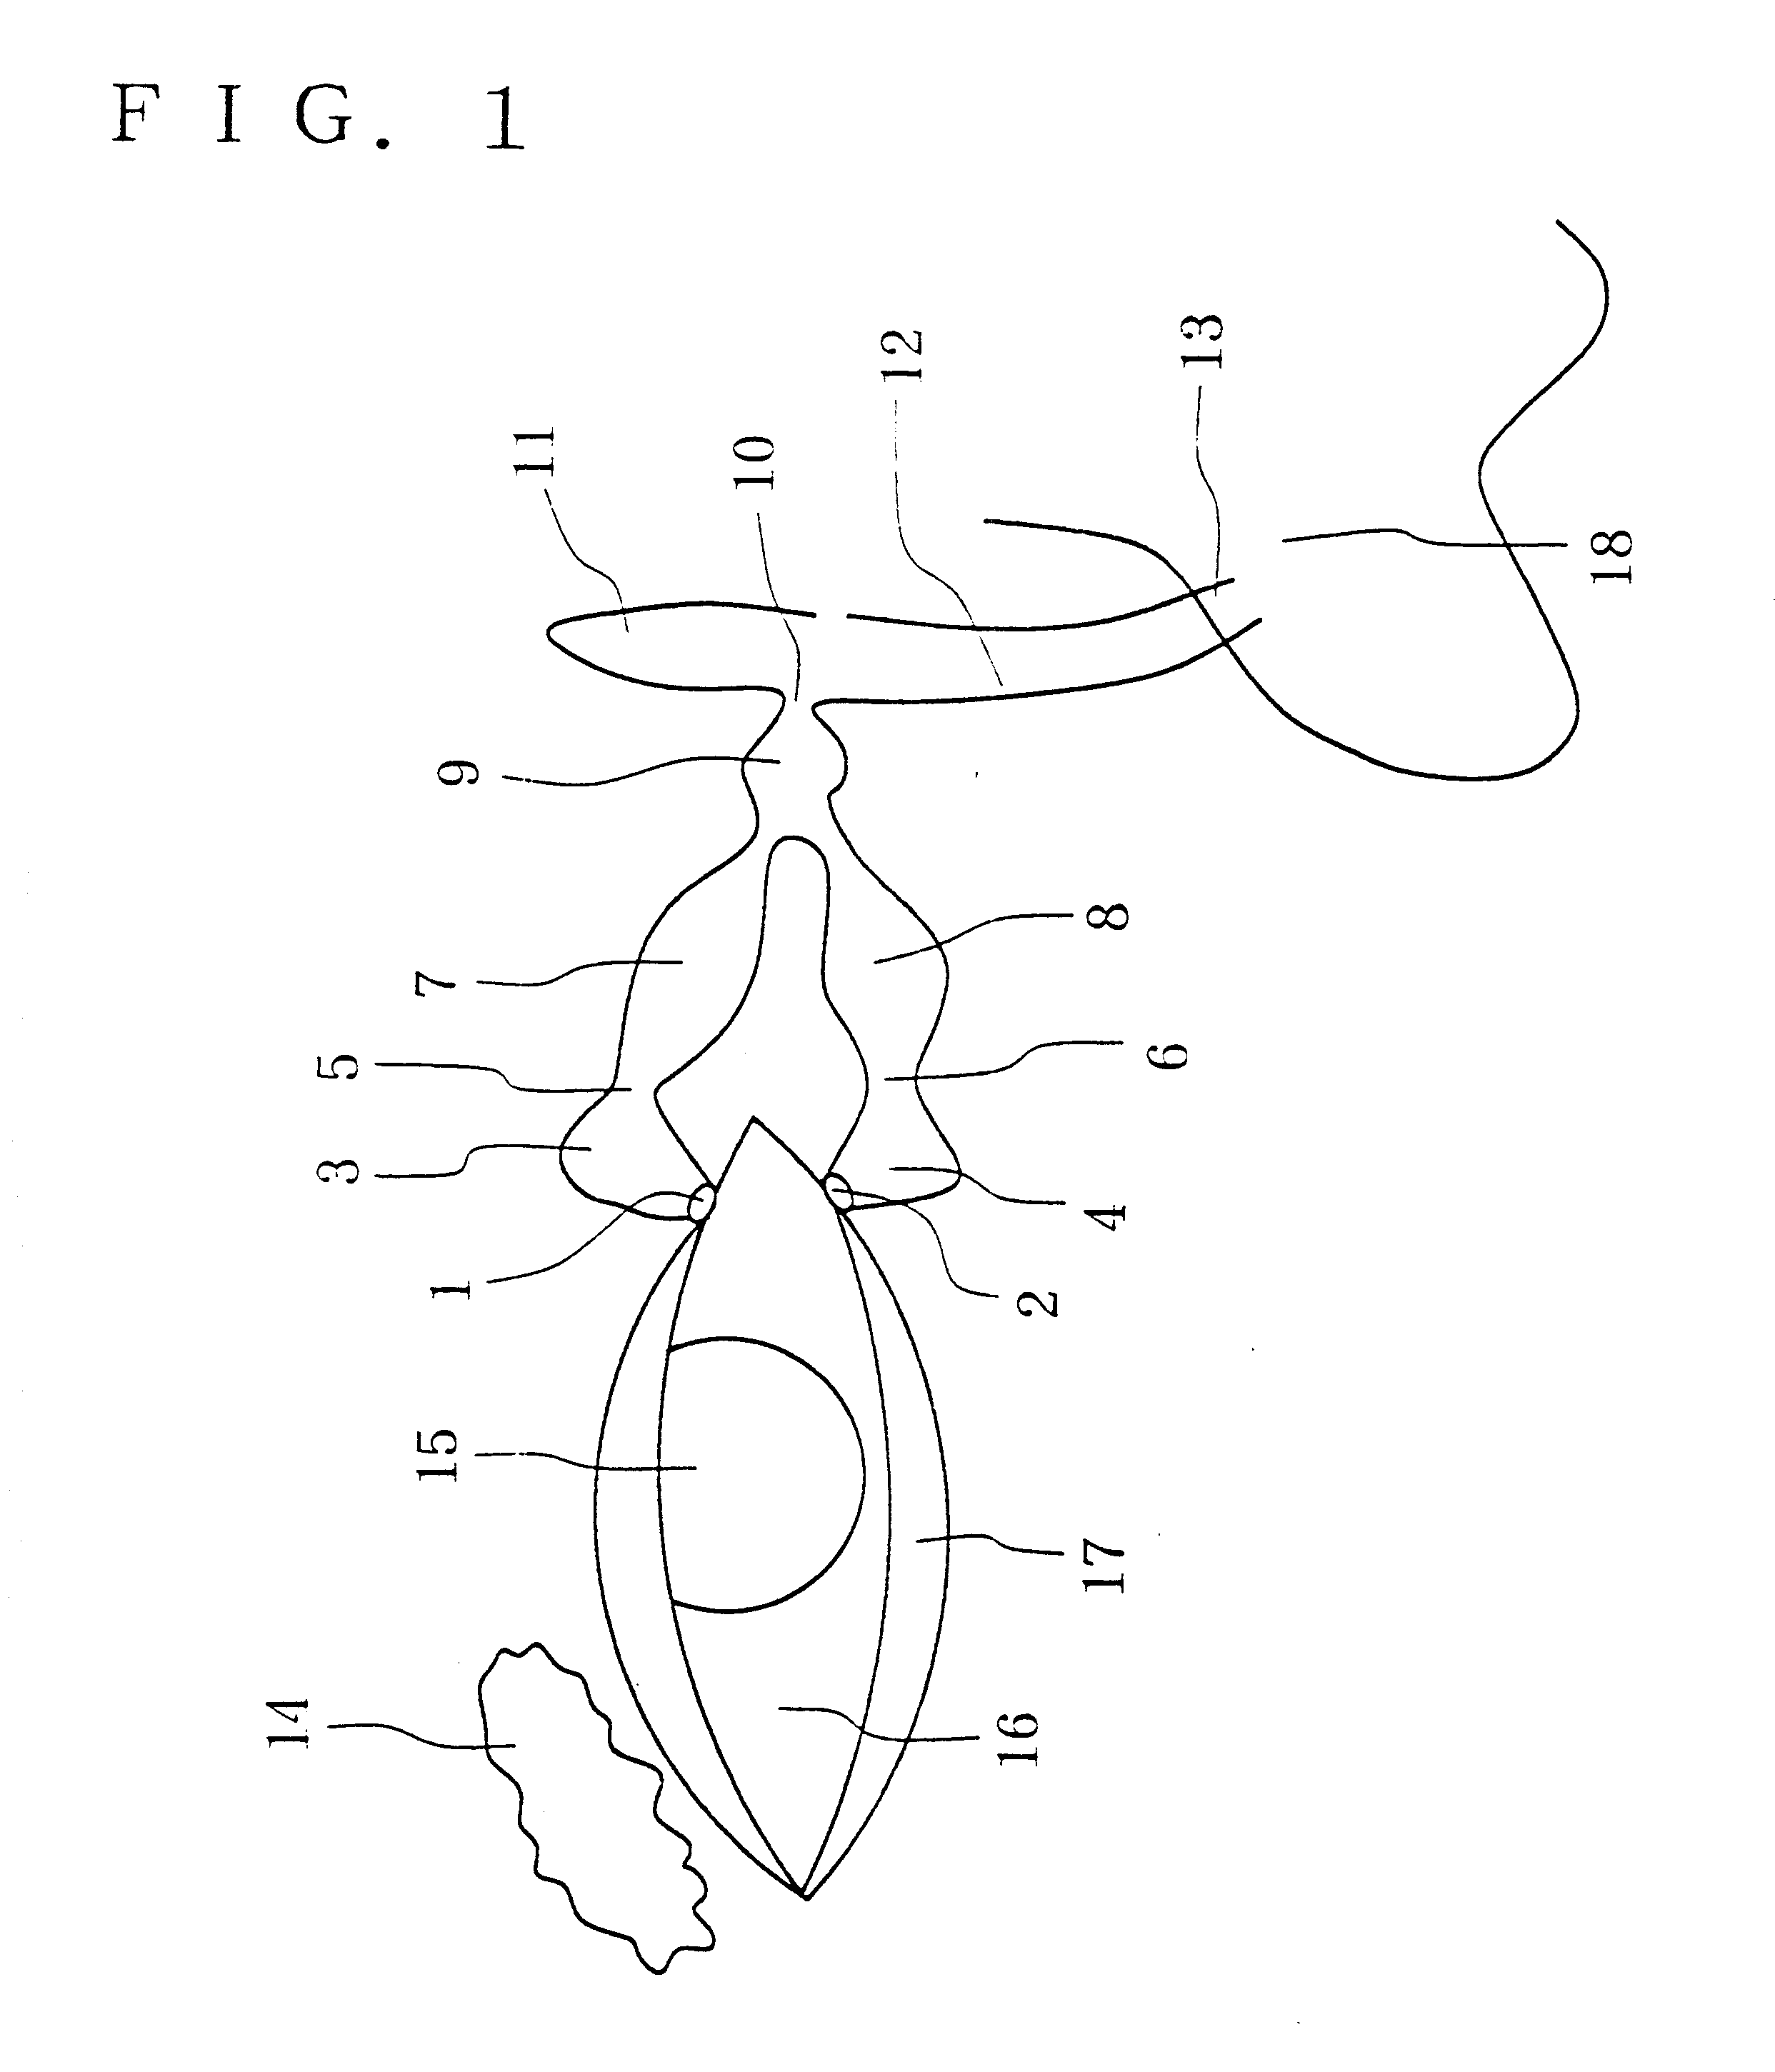 Apparatus for intubation of lacrimal drainage pathway